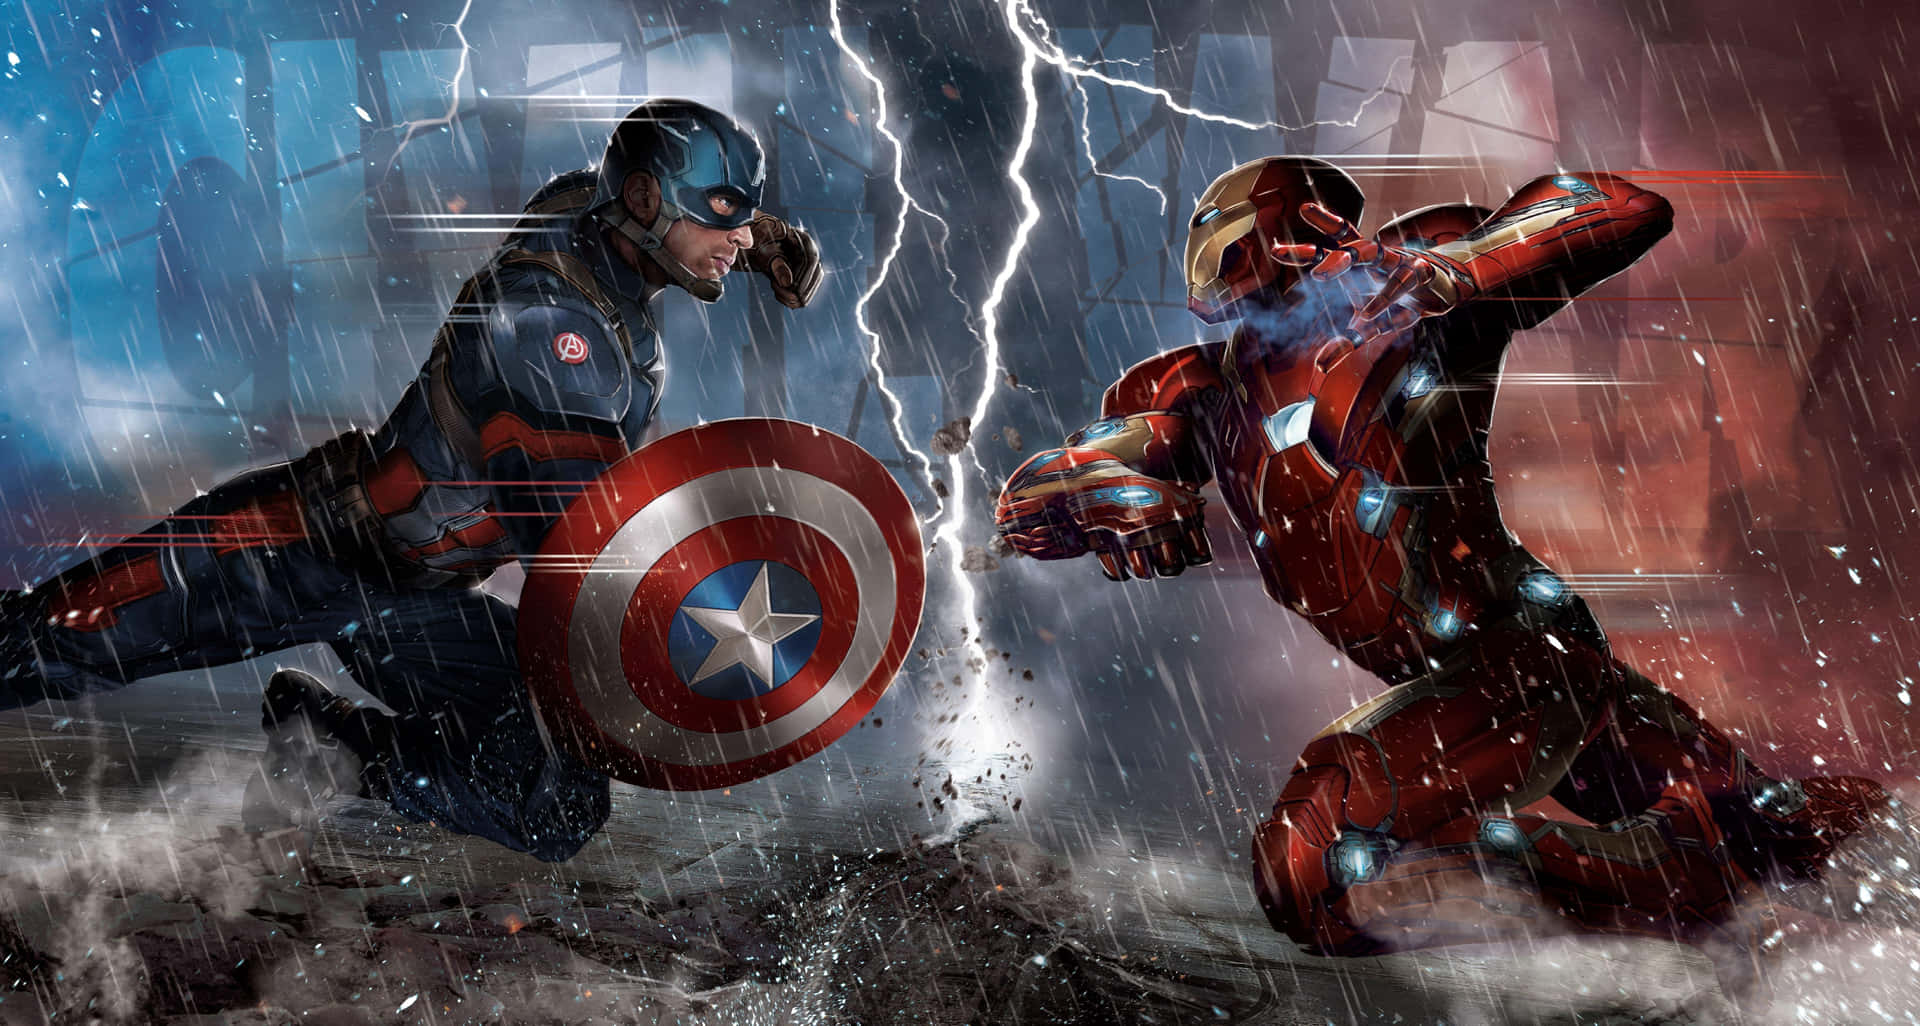 Iron Man and Captain America Fight Together for Justice Wallpaper